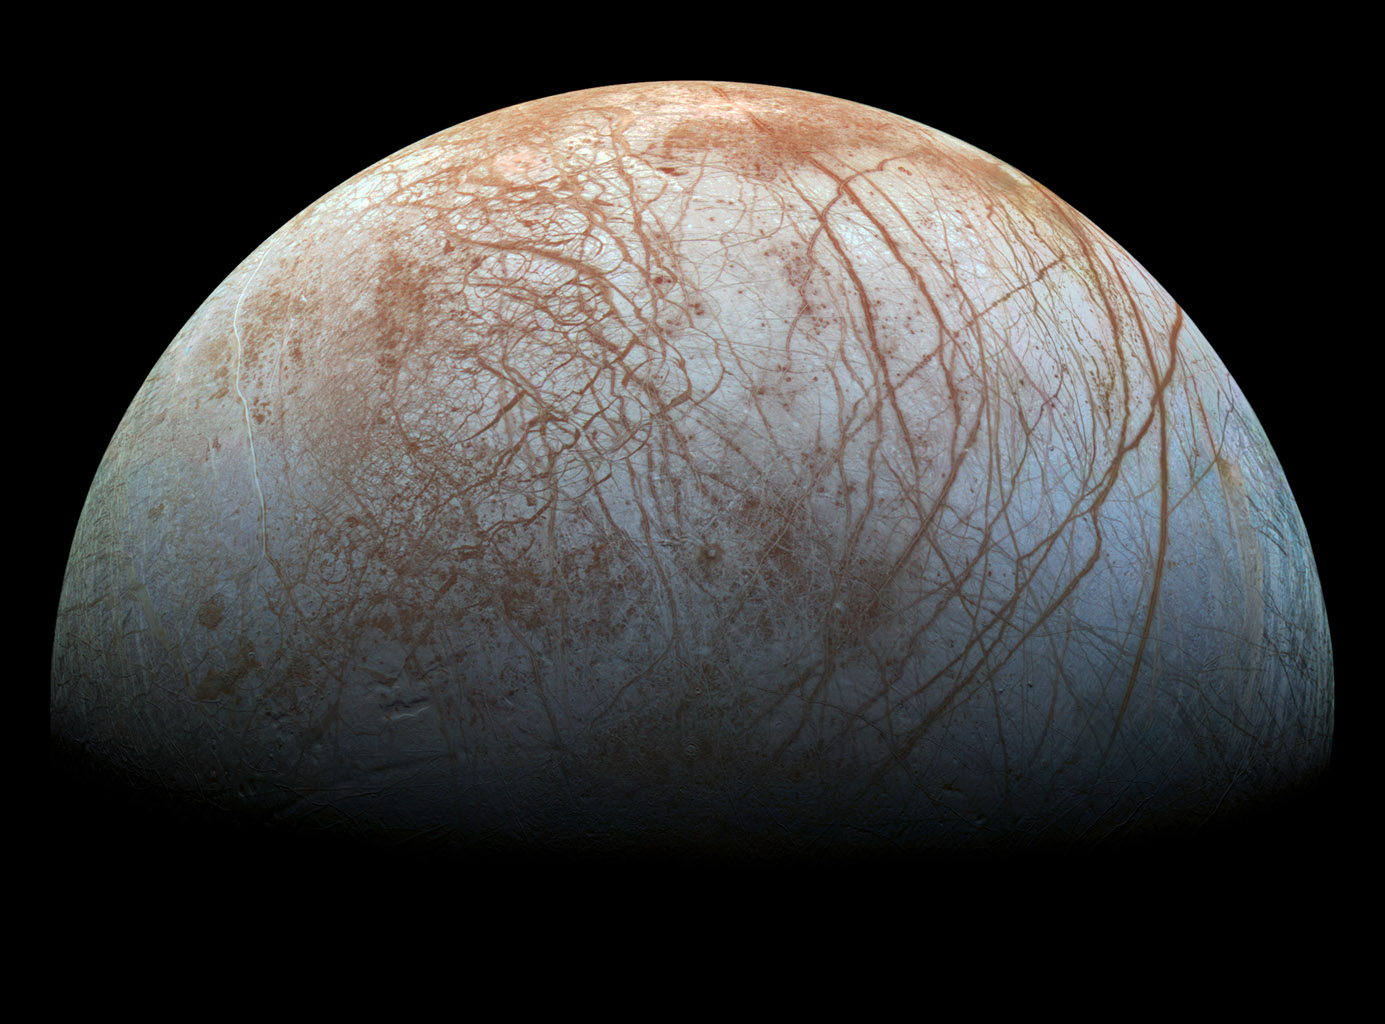 A different kind of Europeans: The discolored cracks of the Jovian moon Europa could suggest life